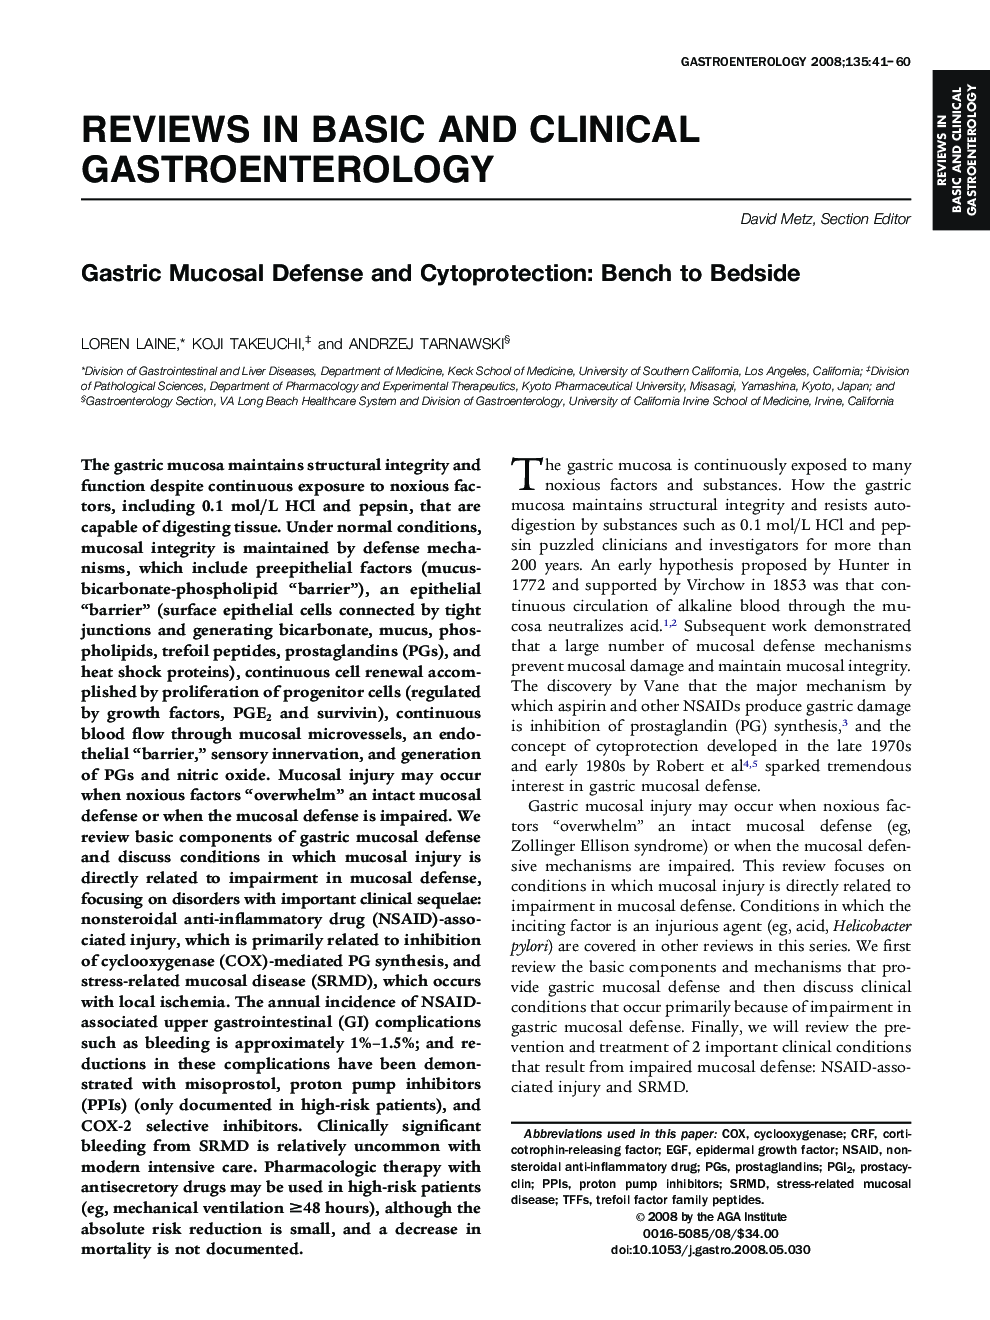 Gastric Mucosal Defense and Cytoprotection: Bench to Bedside 